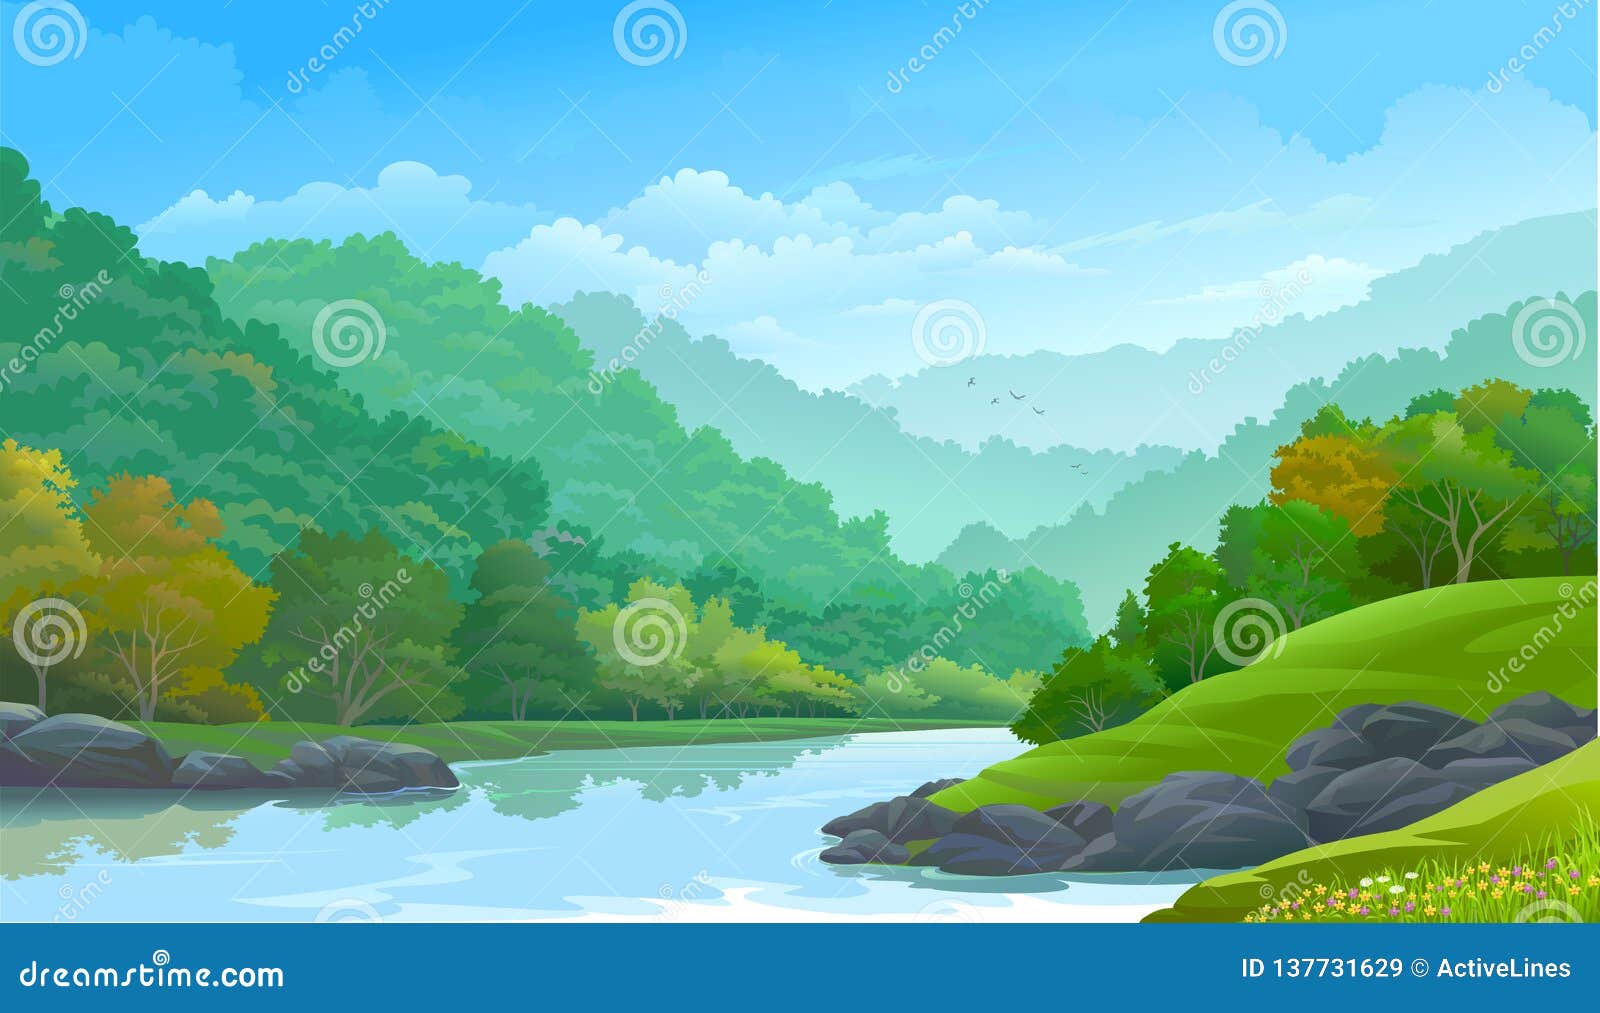 dense green forest along side a river and a few rocks